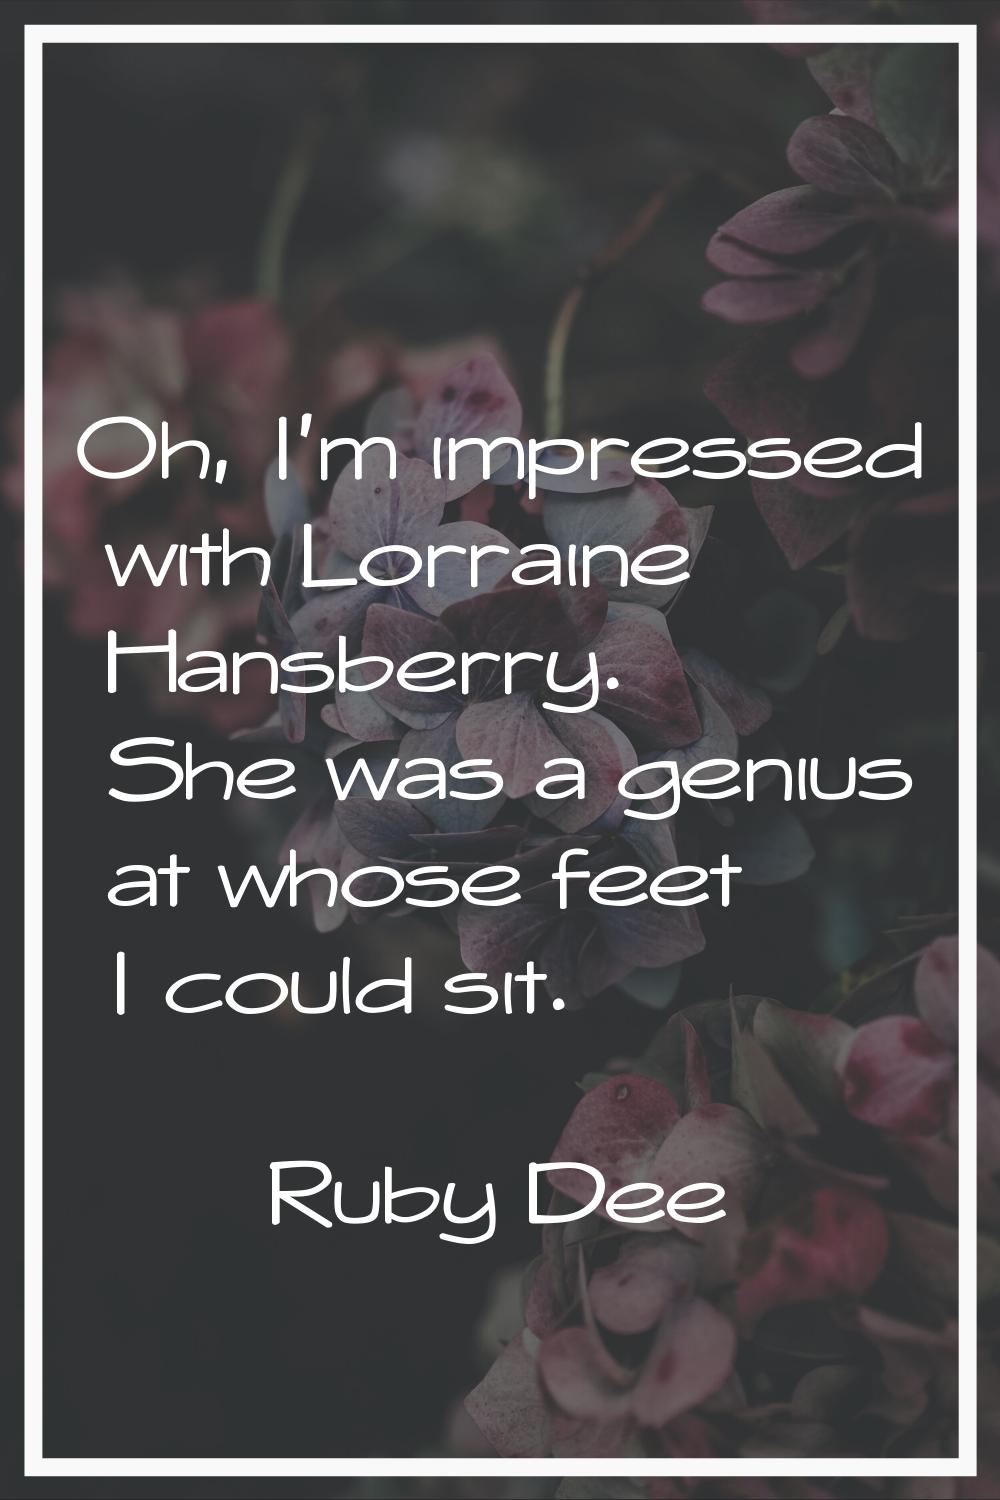 Oh, I'm impressed with Lorraine Hansberry. She was a genius at whose feet I could sit.